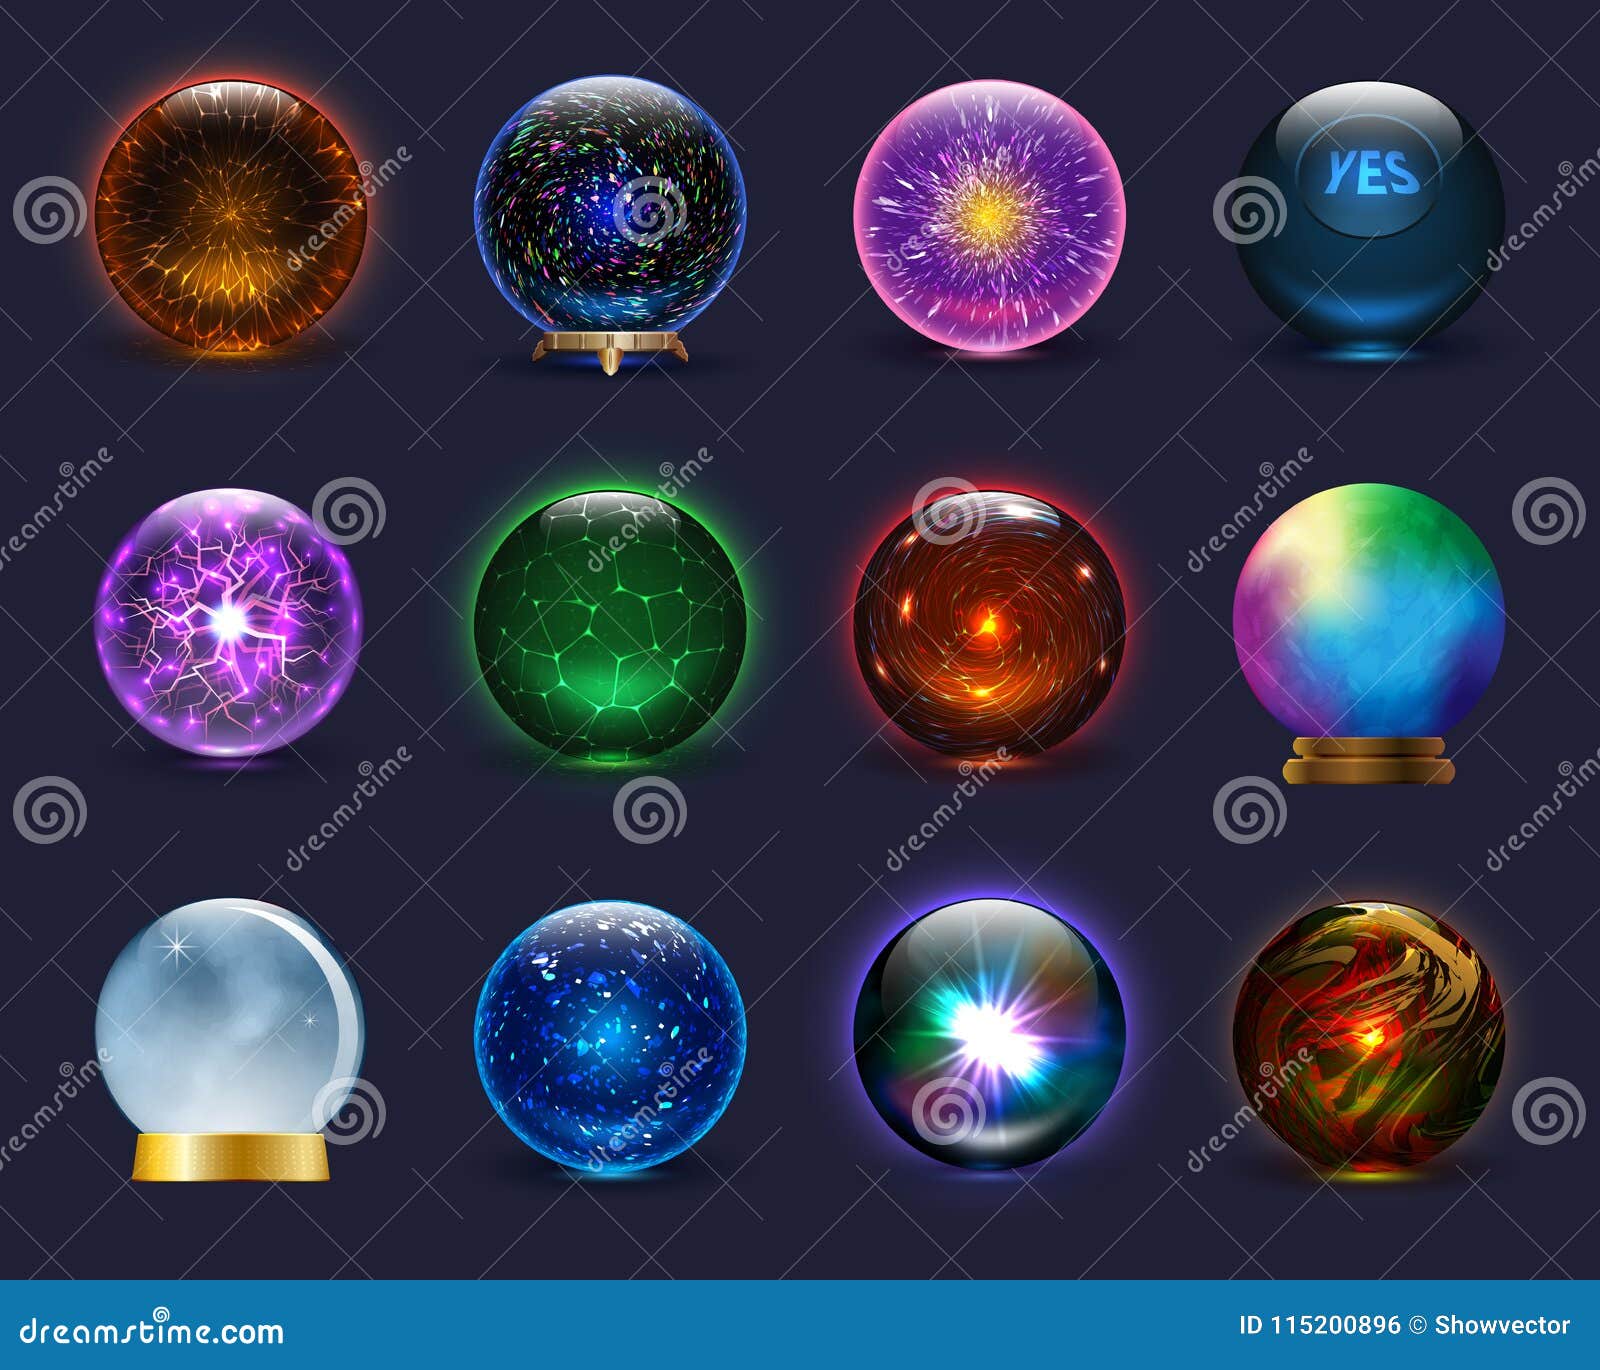 Free Vector  Magic ball with electric lightning inside, realistic